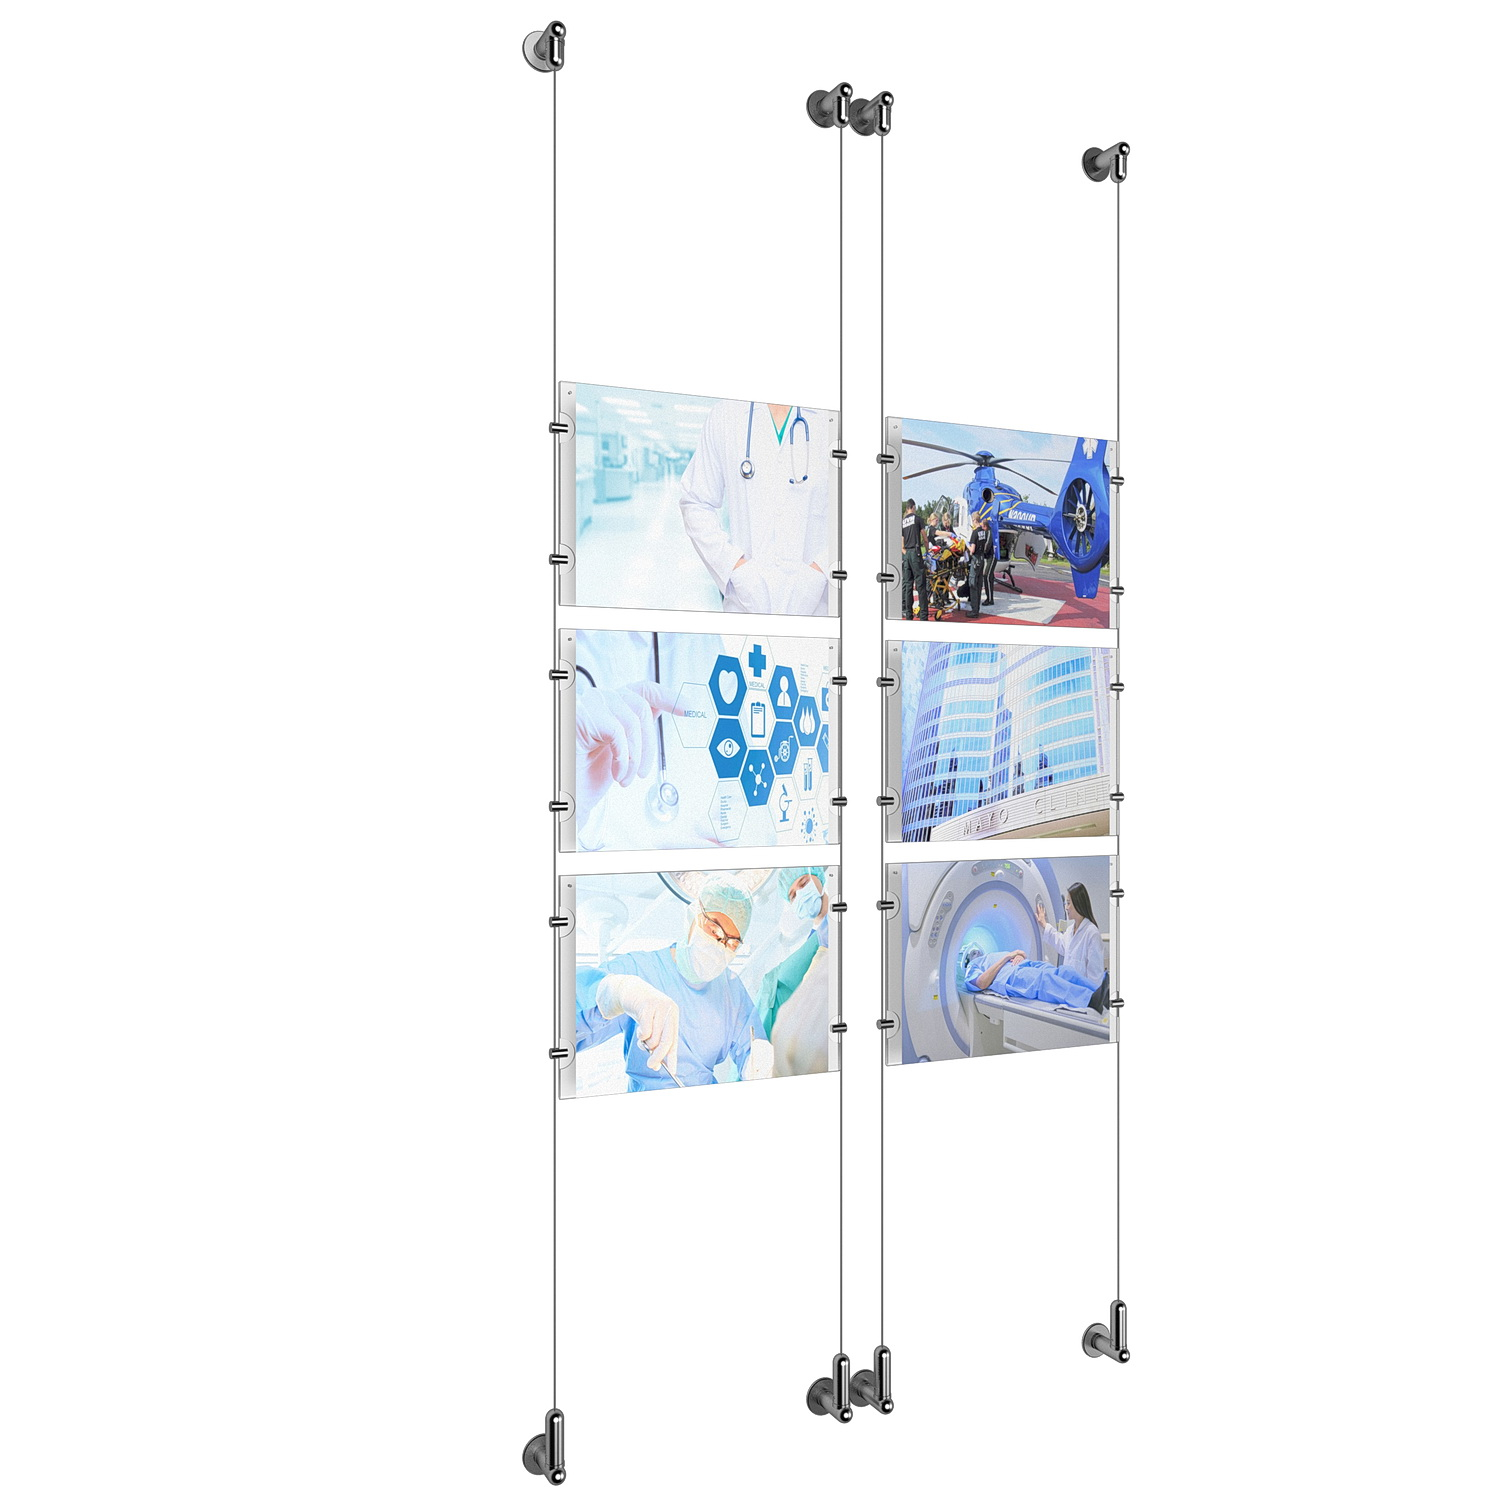 (6) 11'' Width x 8-1/2'' Height Clear Acrylic Frame & (4) Wall-to-Wall Aluminum Clear Anodized Cable Systems with (24) Single-Sided Panel Grippers